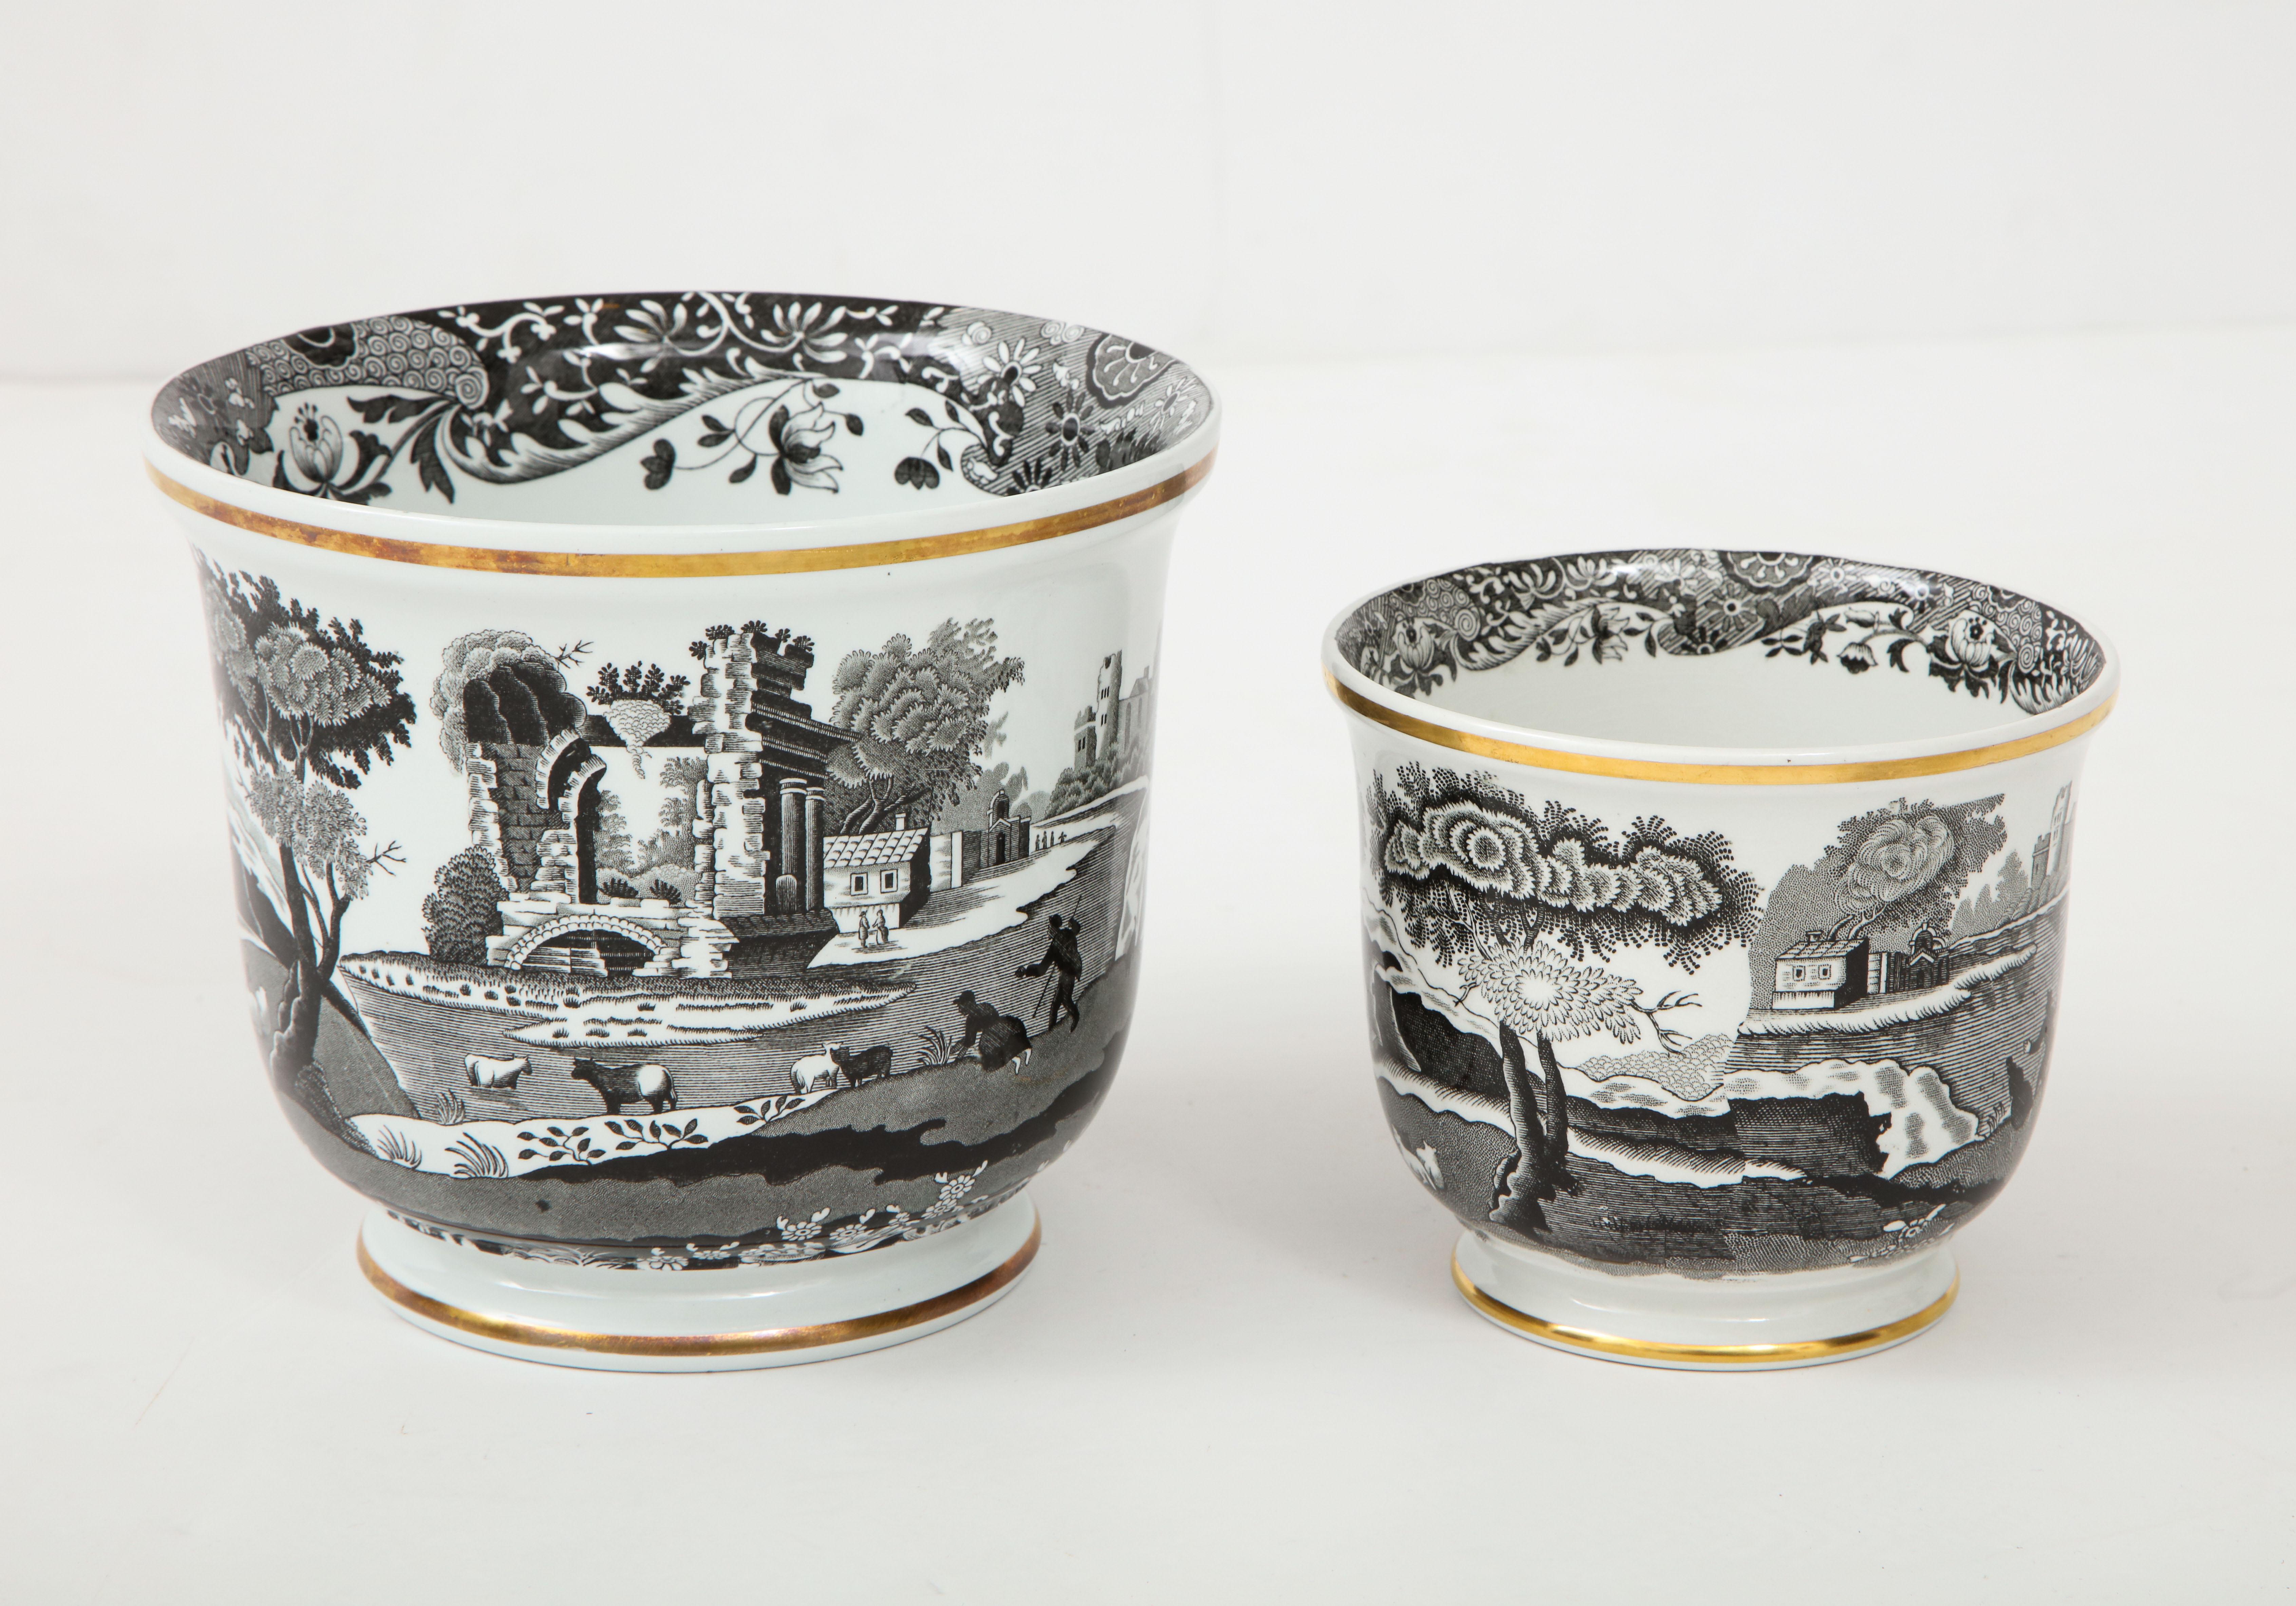 Pair of black and white transfer wear cach potrs depicting scenes of the English countryside, each trimmed with a gold stripe. Stamped on bottom, sold as a pair

Larger vessel measures 5.75